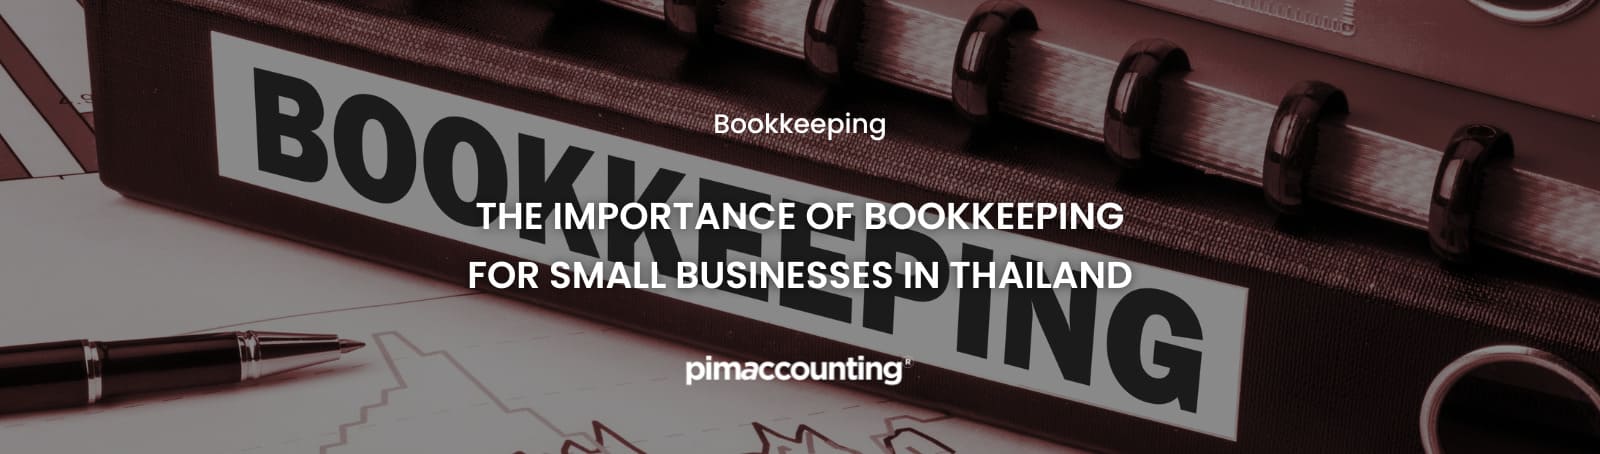 The Importance of Bookkeeping for Small Businesses in Thailand - Pimaccounting